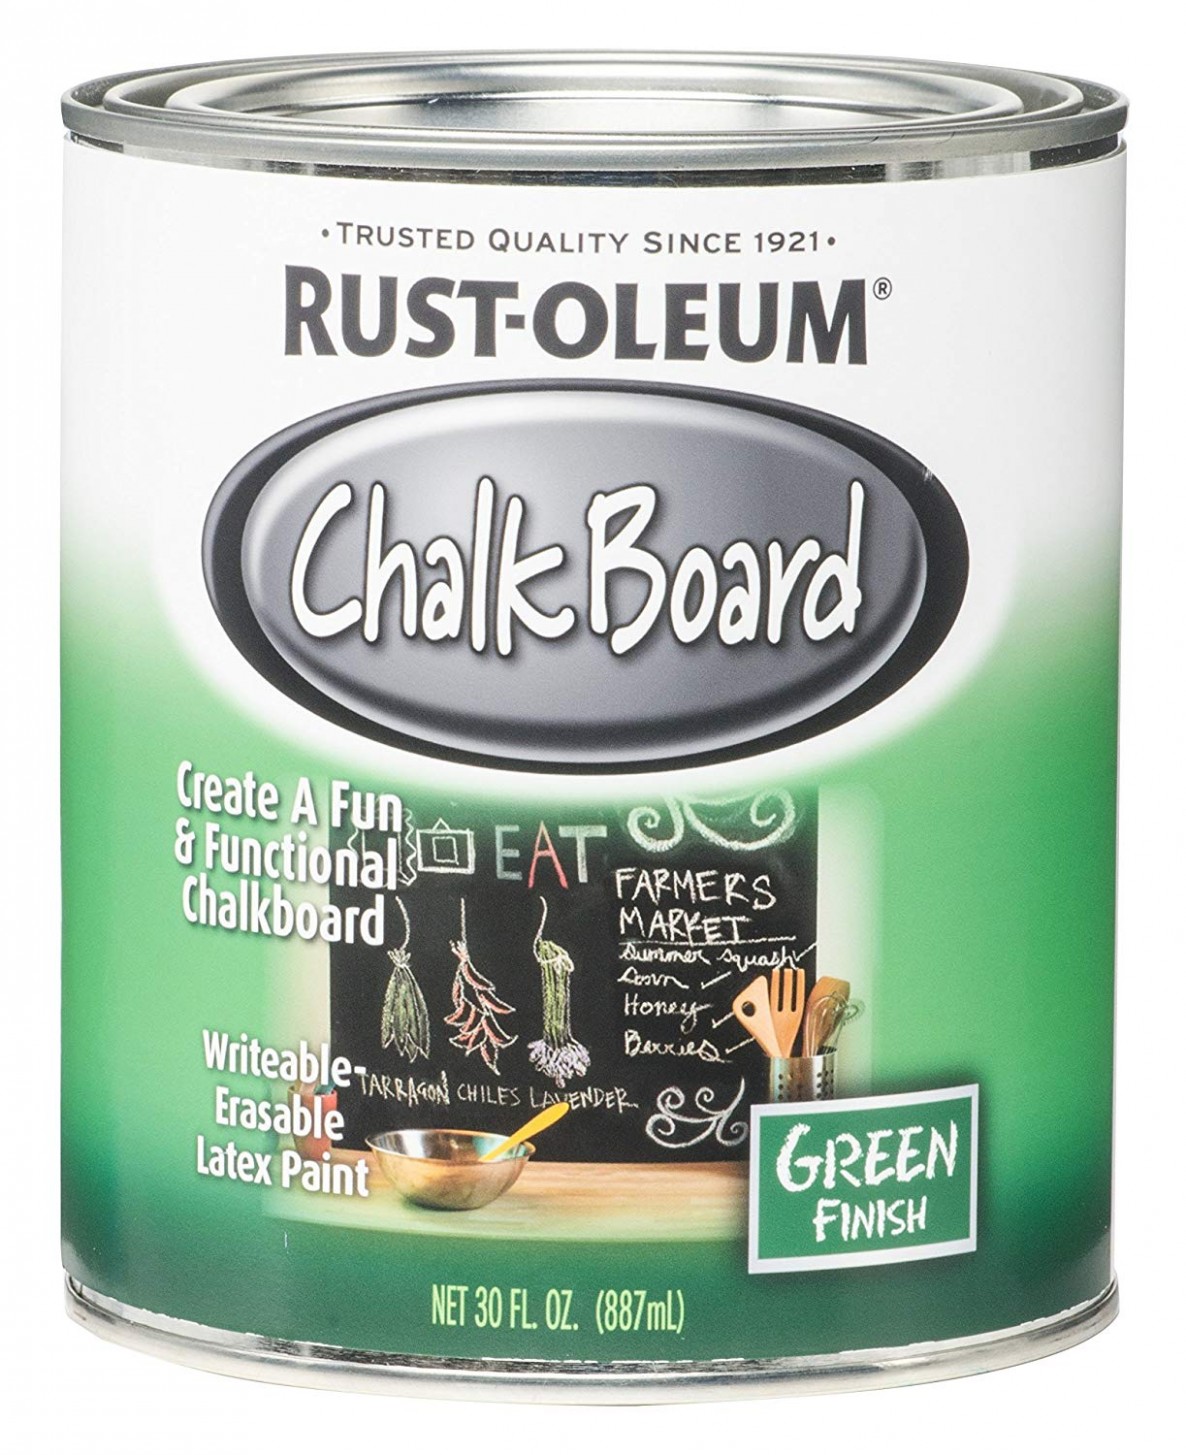 Rustoleum Ncf Green Chalkboard Paint Can You Use Chalkboard Paint On Metal